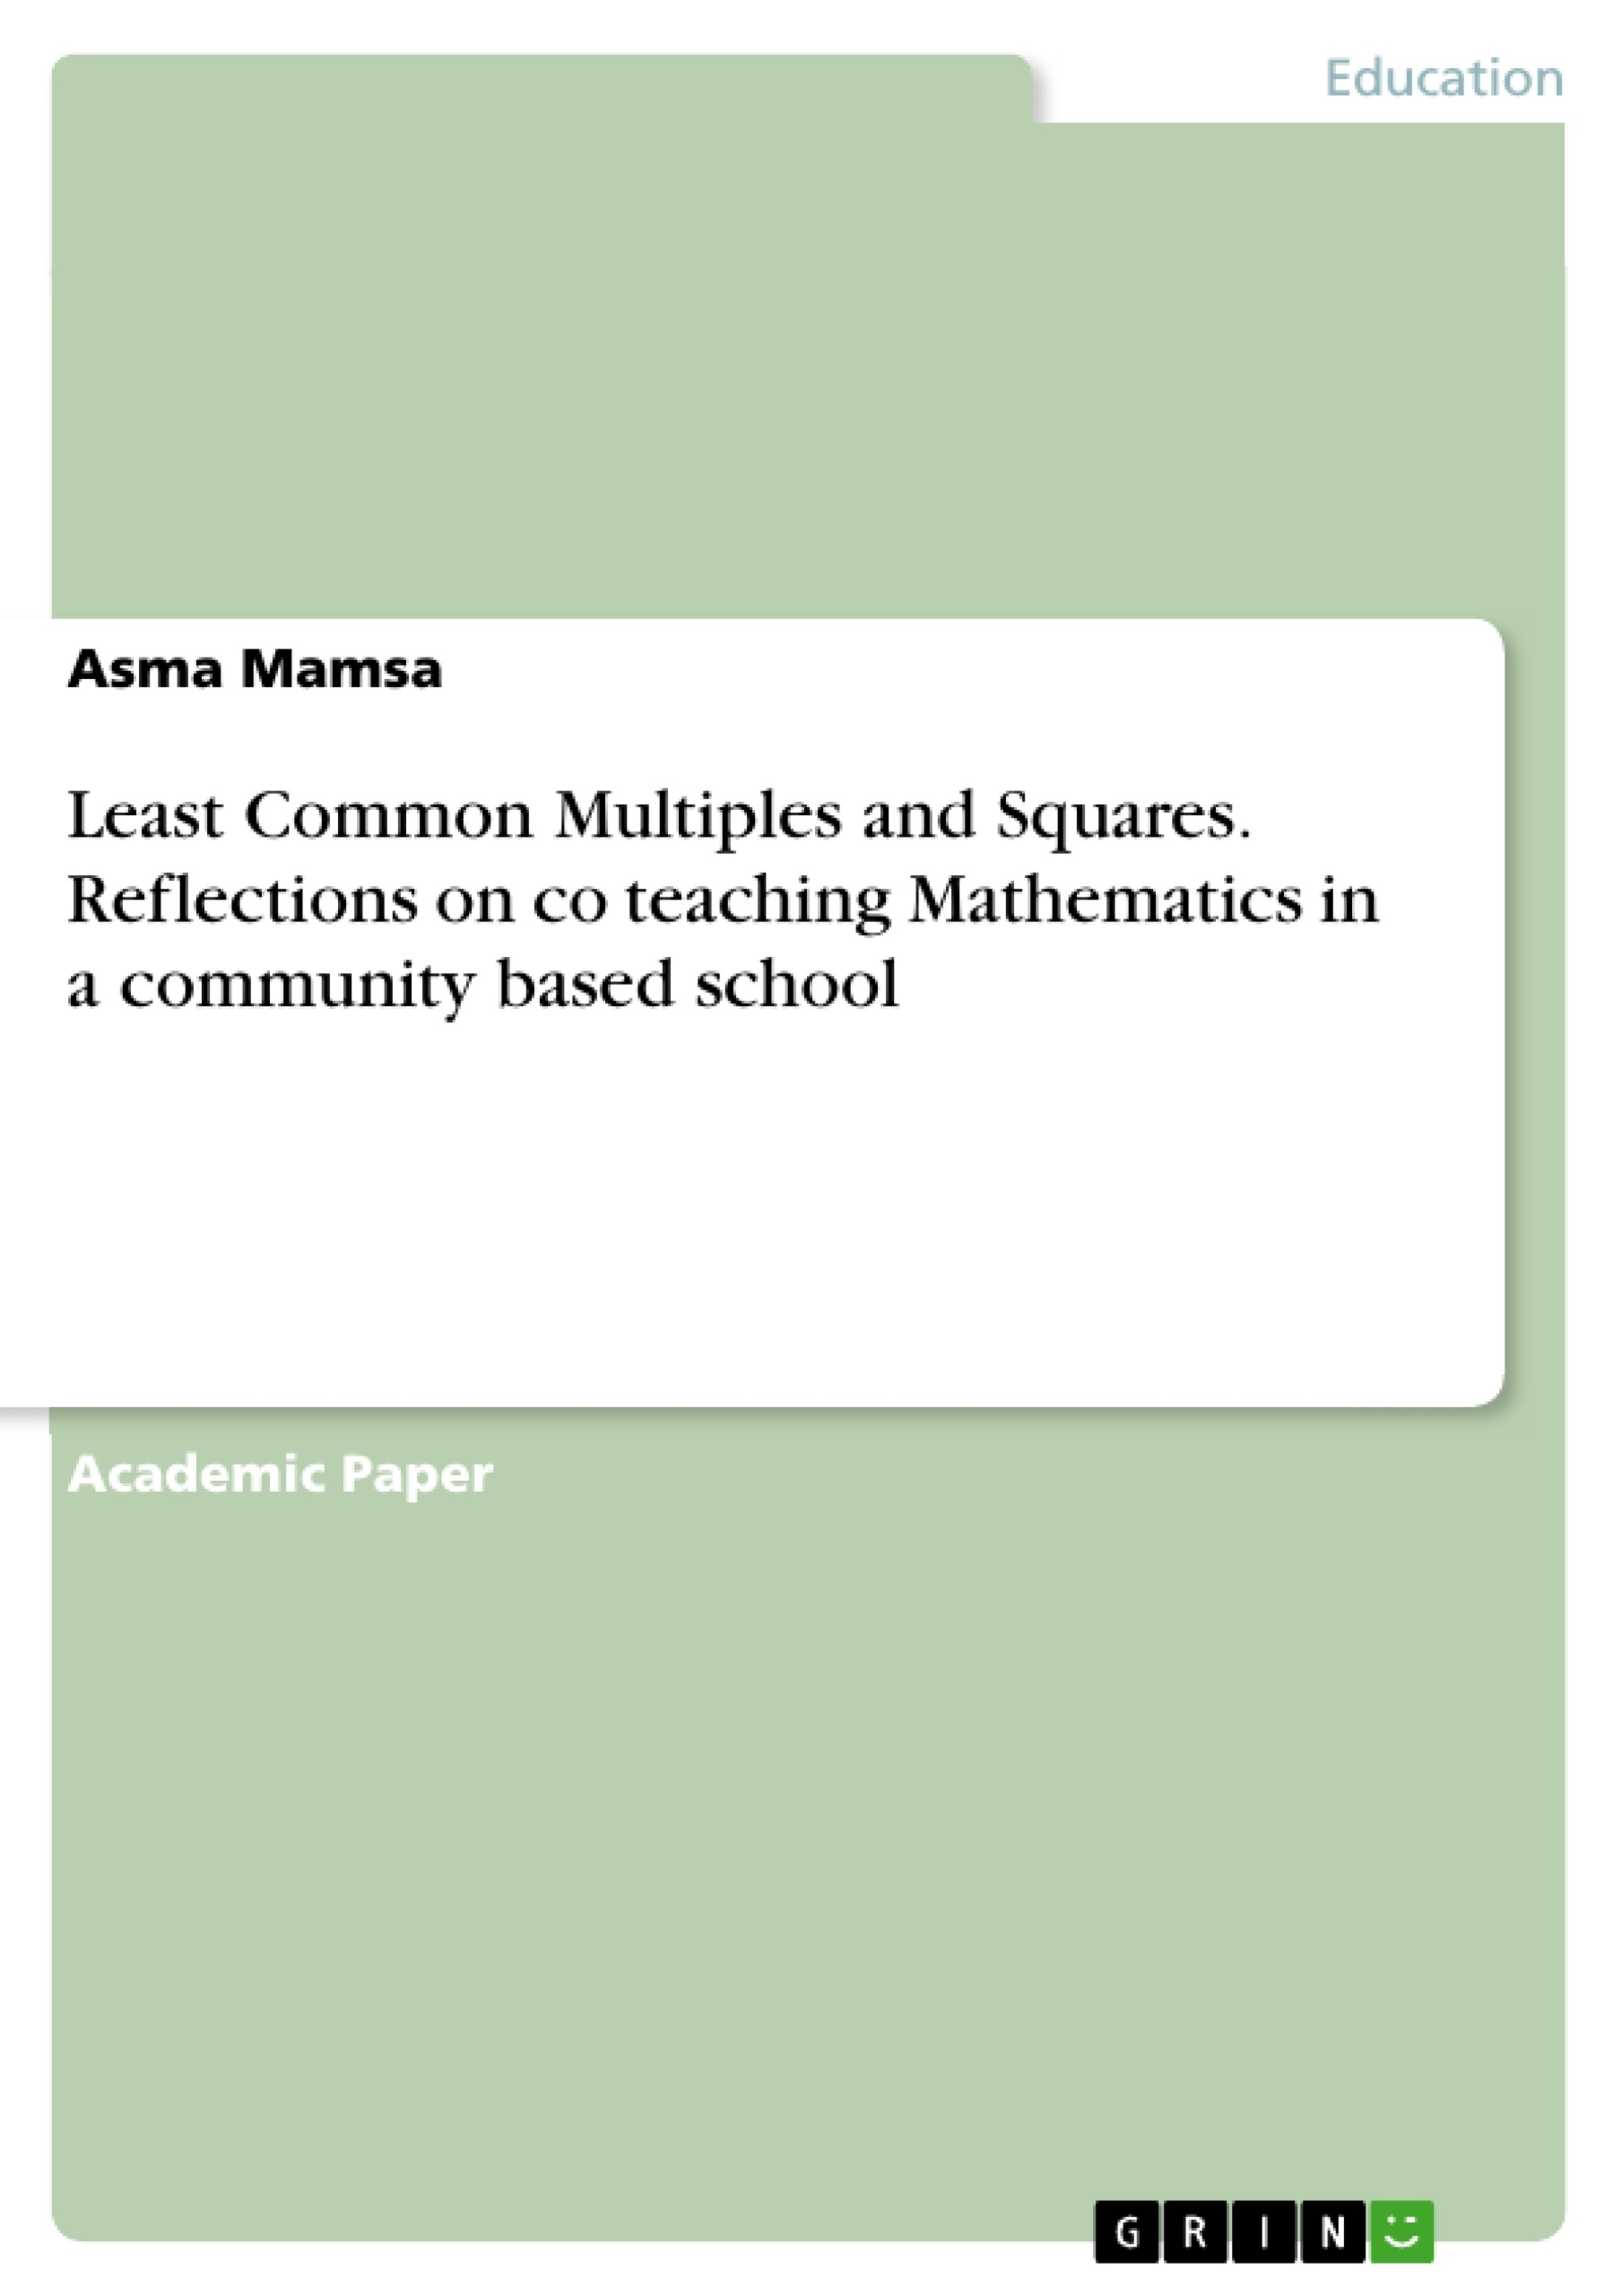 Título: Least Common Multiples and Squares. Reflections on co teaching Mathematics in a community based school